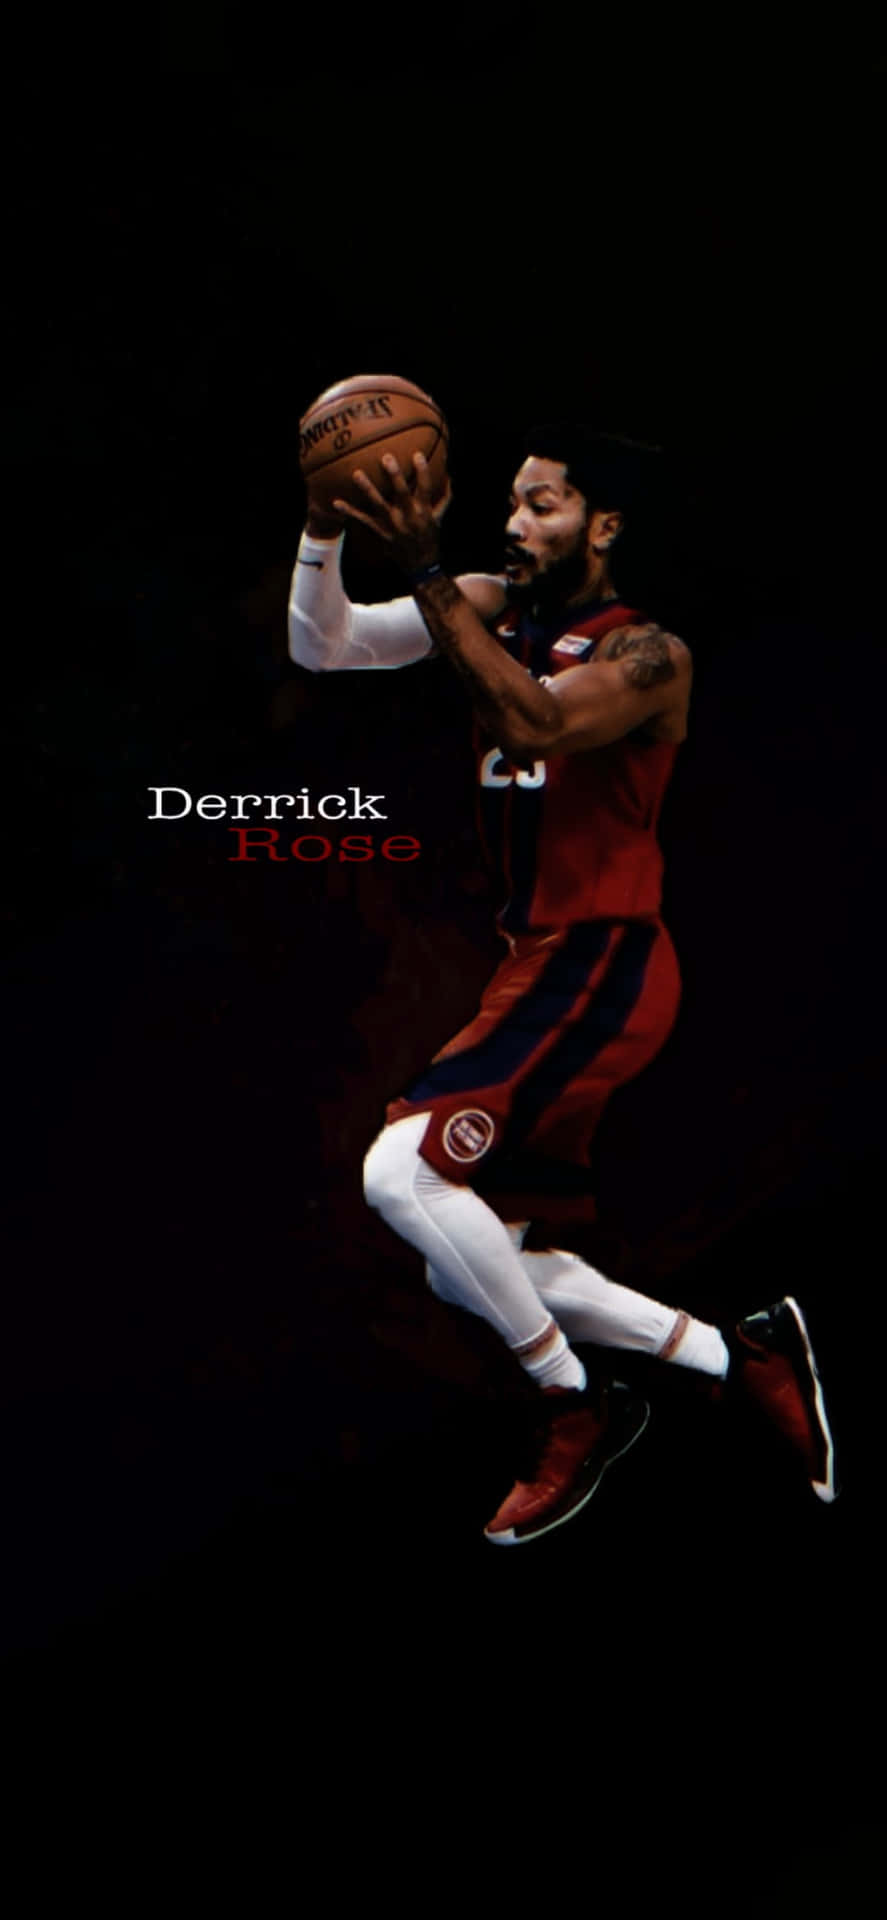 Download Iphone Xs Basketball Derrick Rose Background